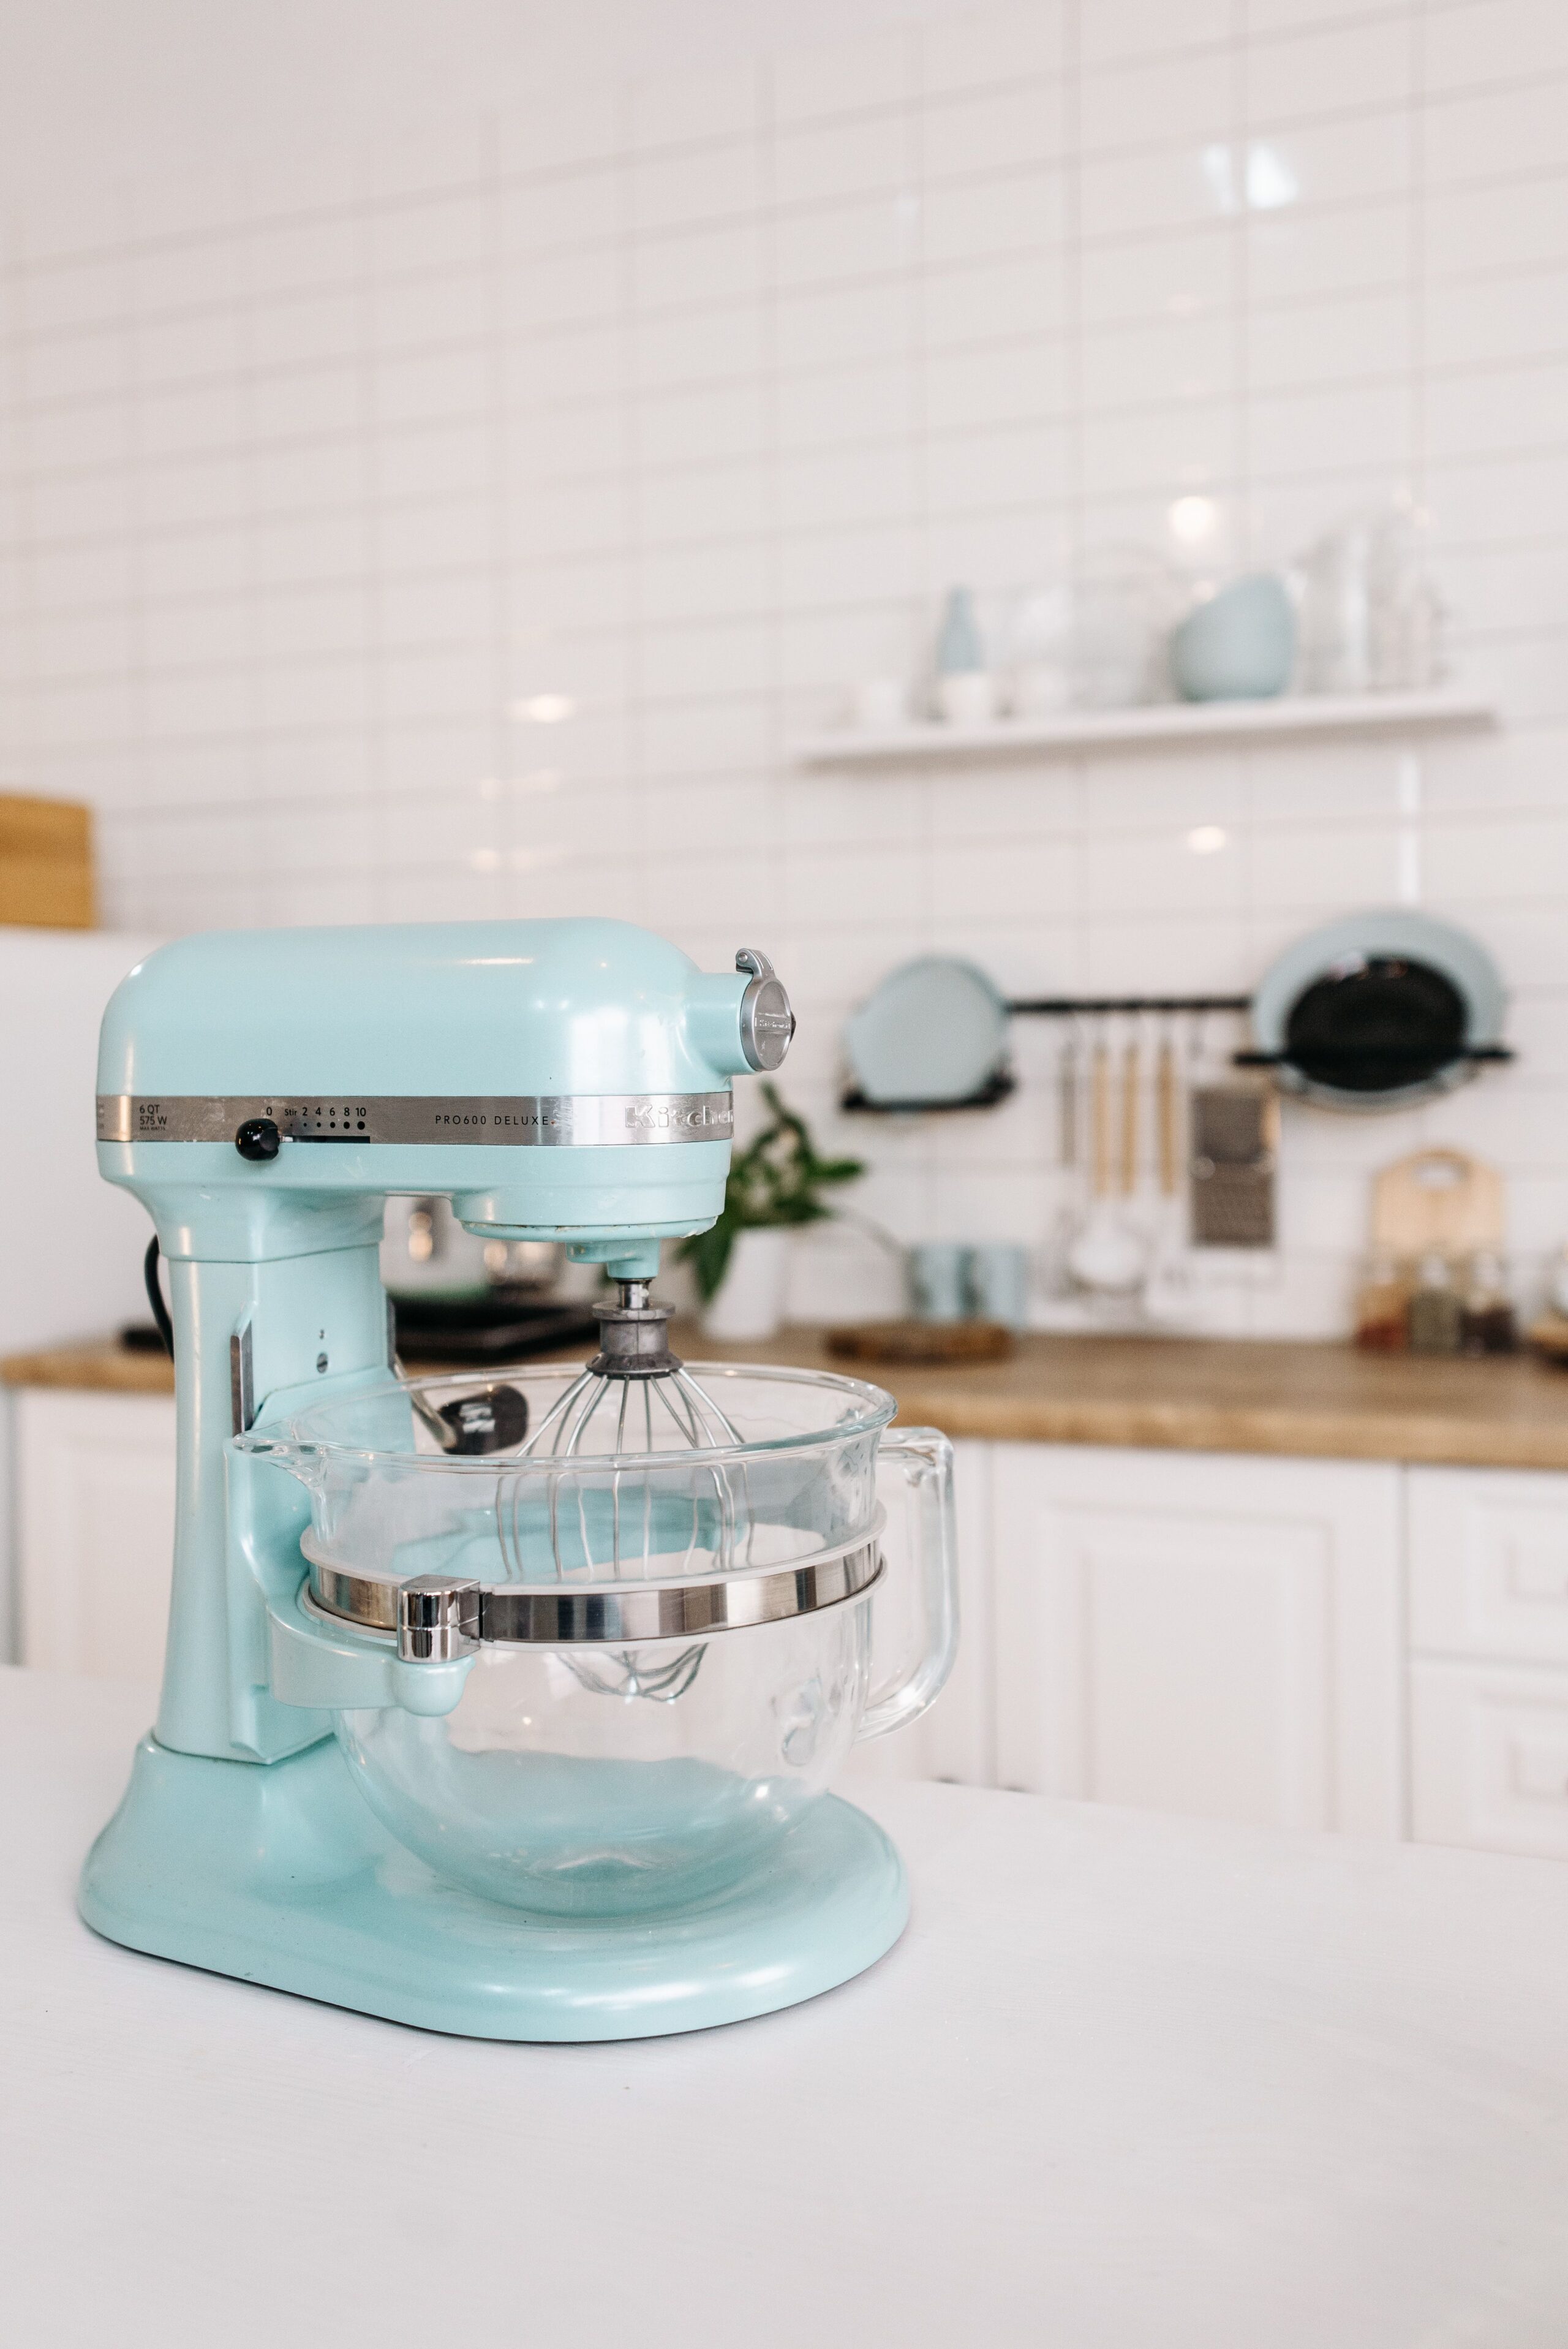 Fix a Leaking KitchenAid Stand Mixer: Quick and Easy Grease Change